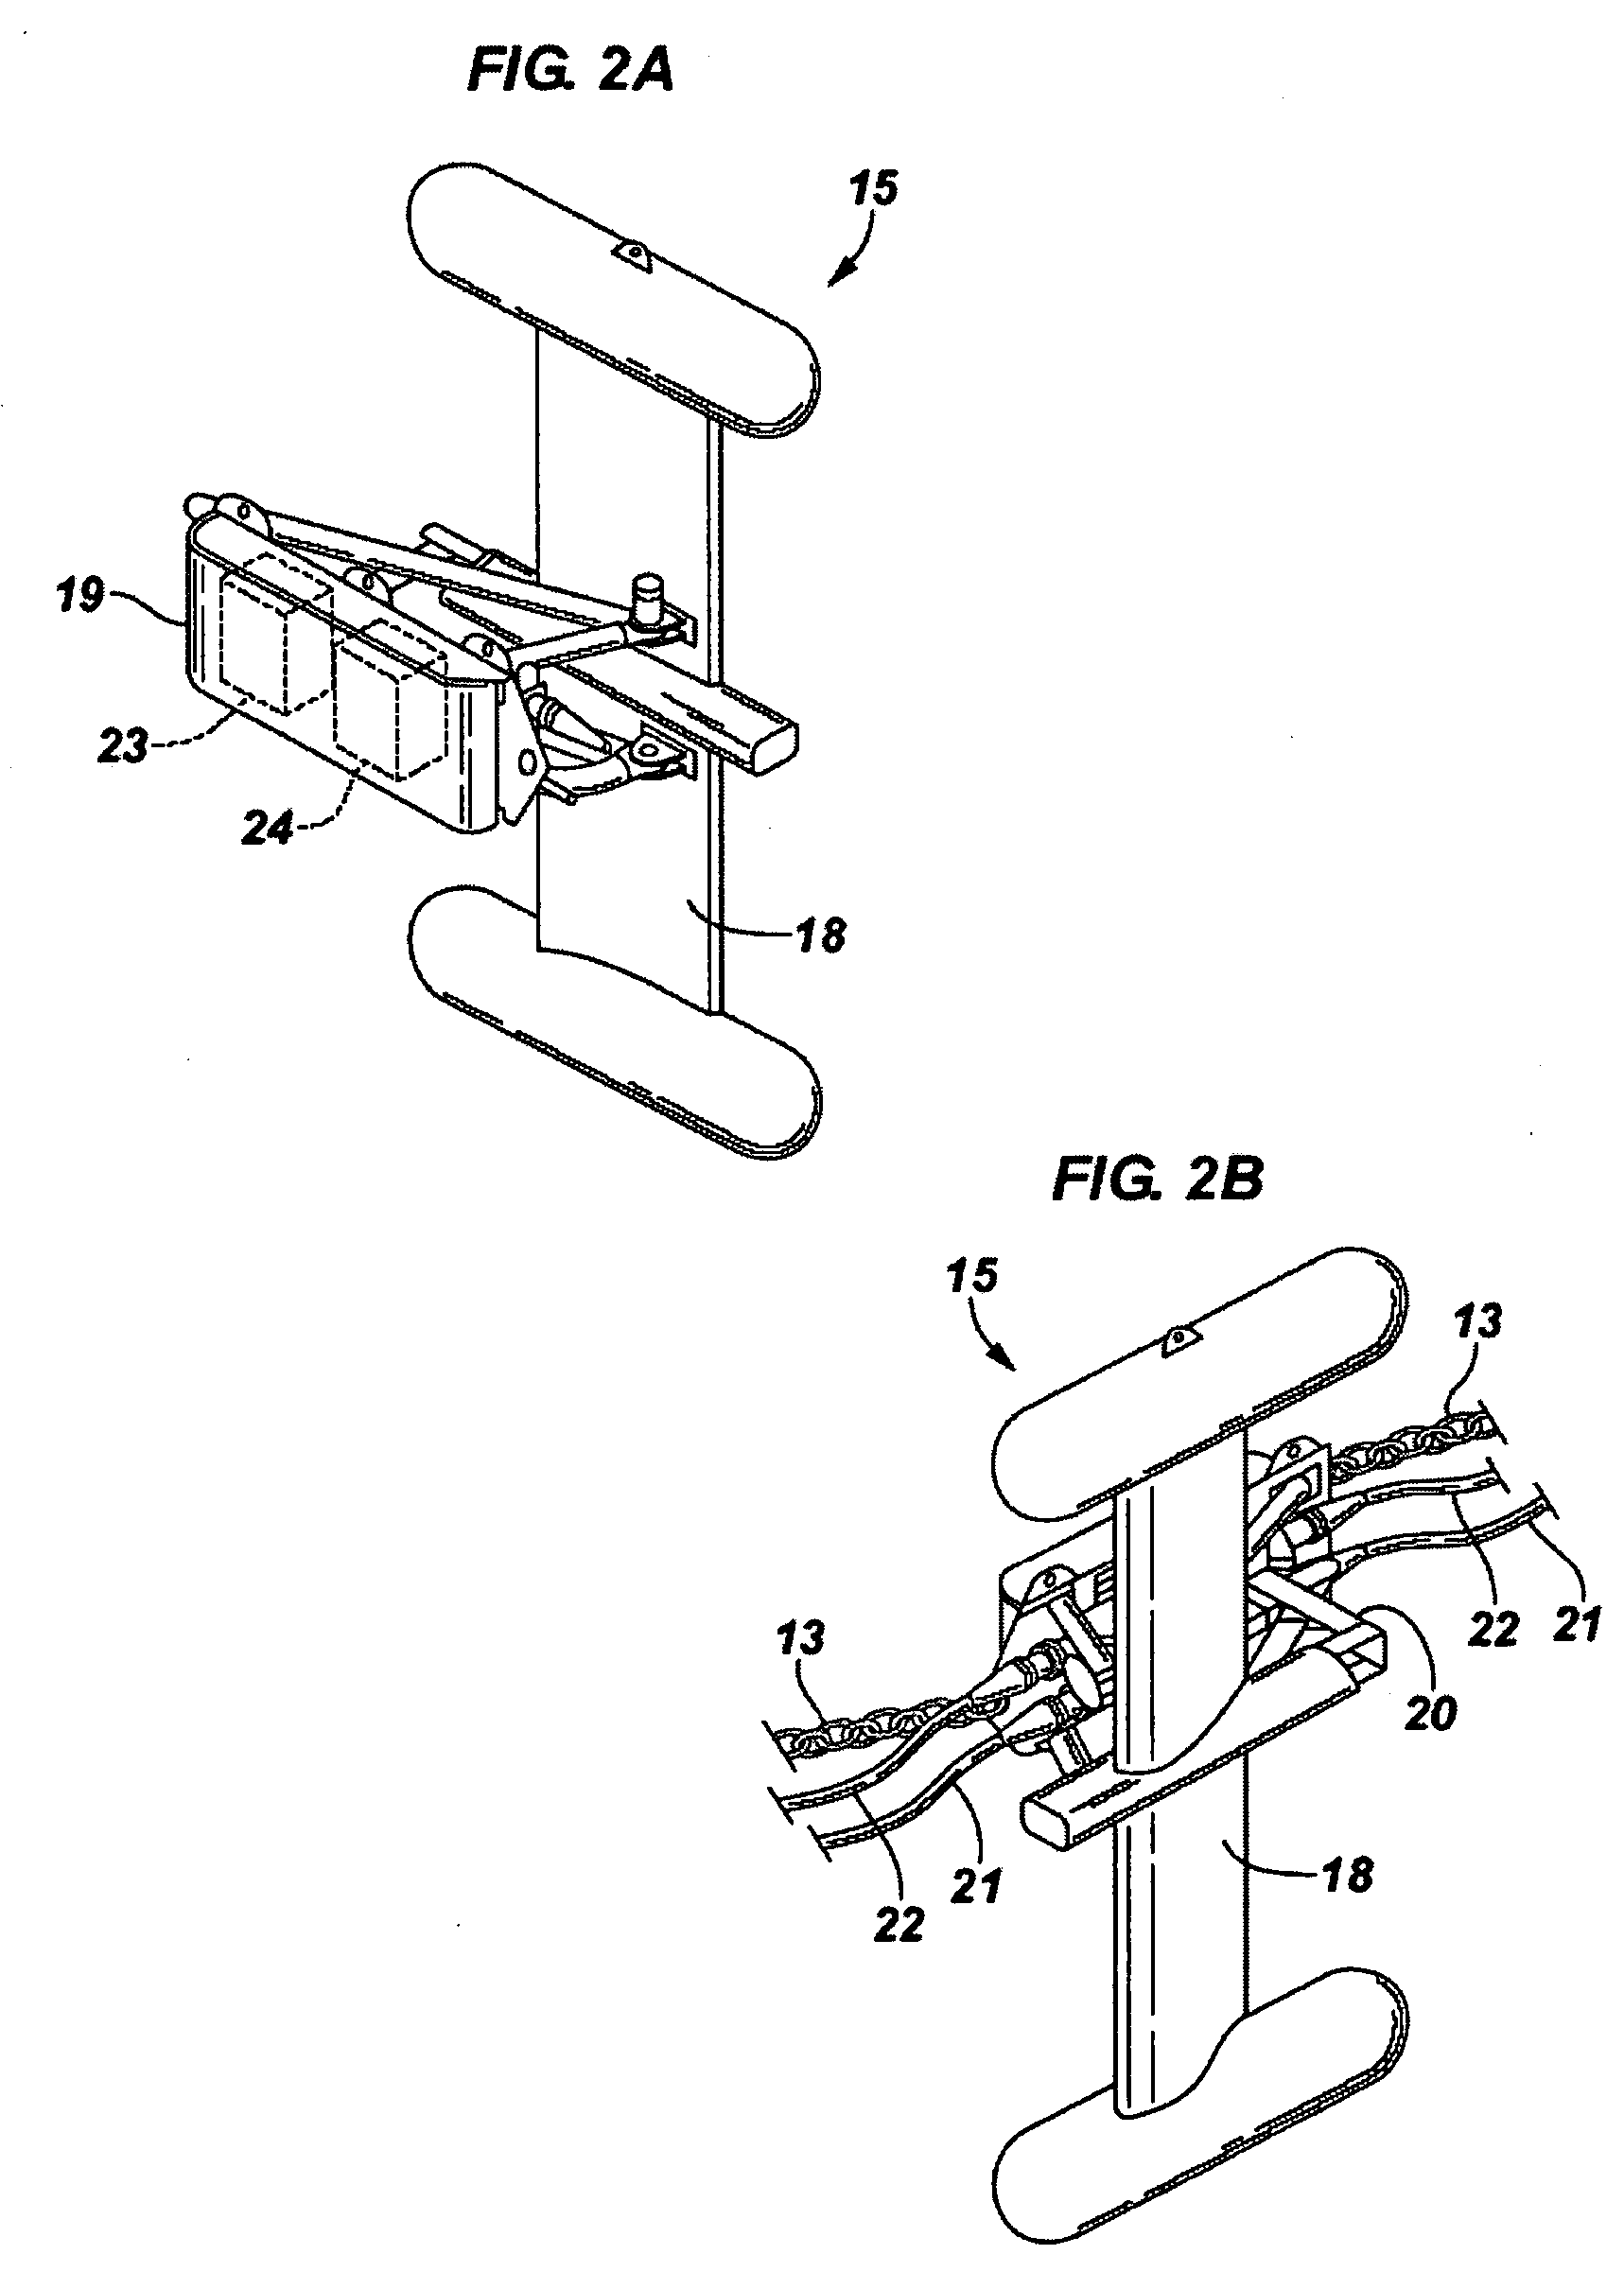 Systems and methods for steering seismic arrays